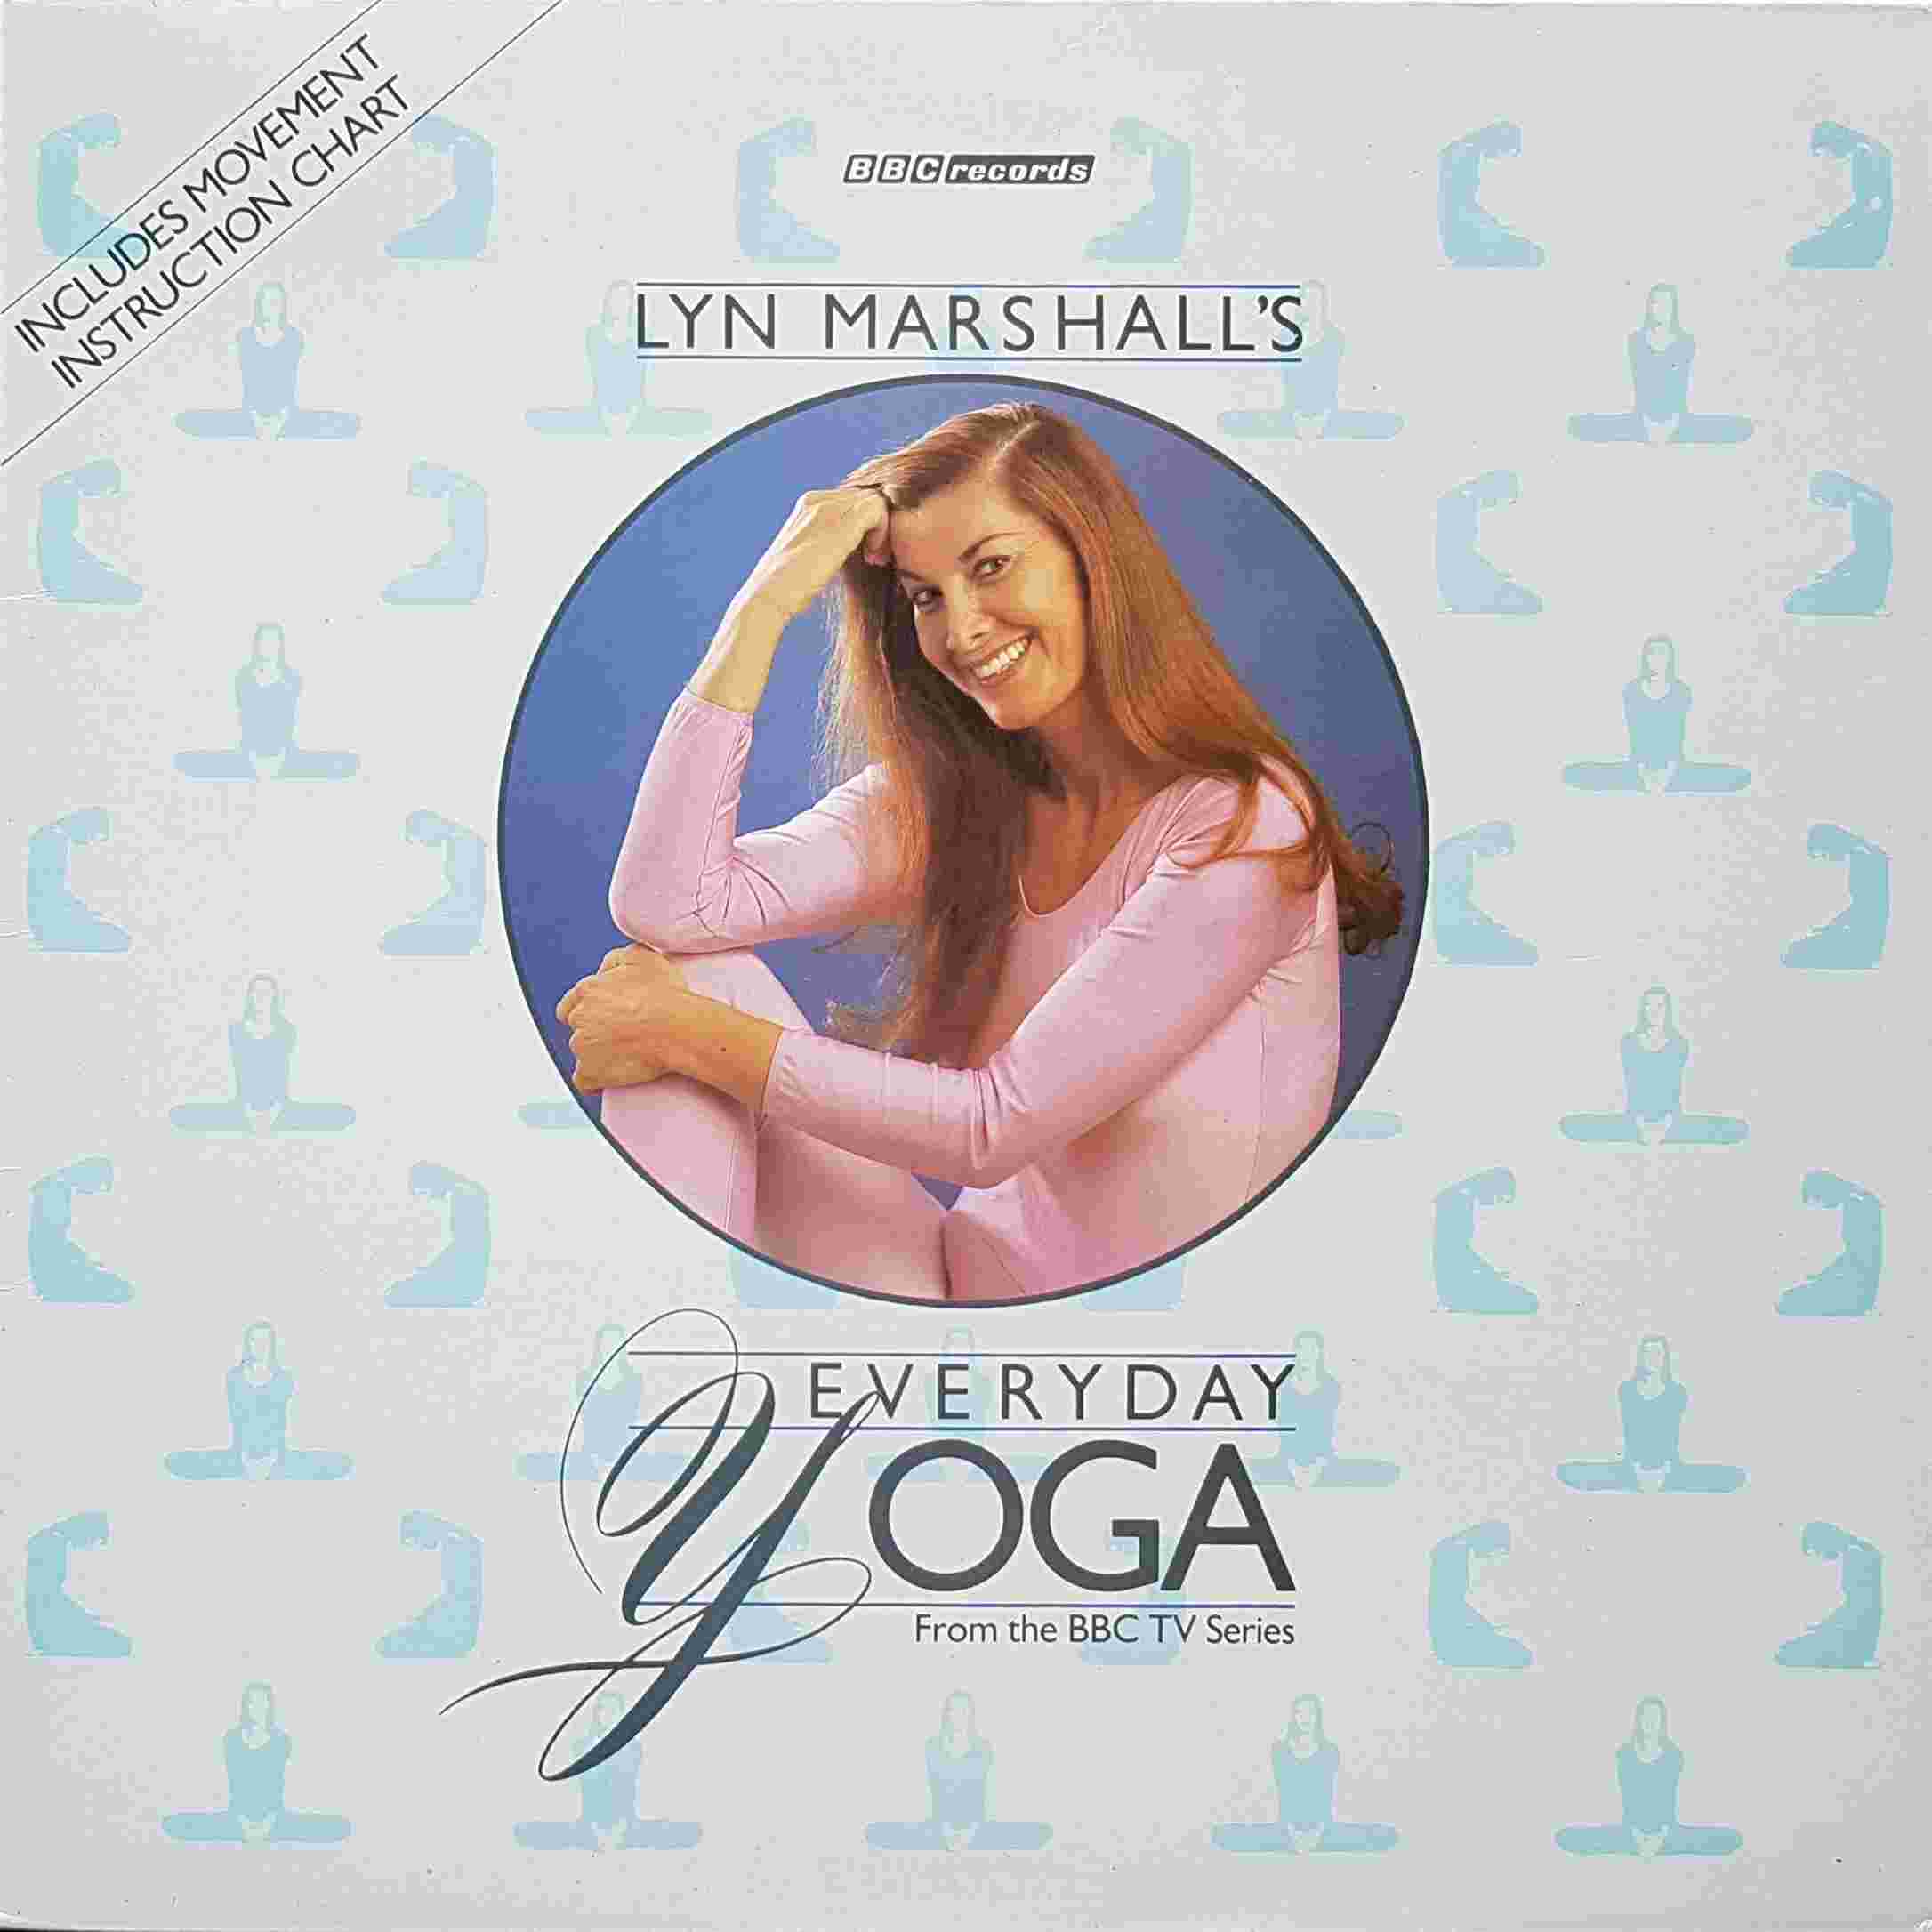 Picture of REH 461 Lyn marshall's everyday yoga by artist Lyn marshall from the BBC albums - Records and Tapes library